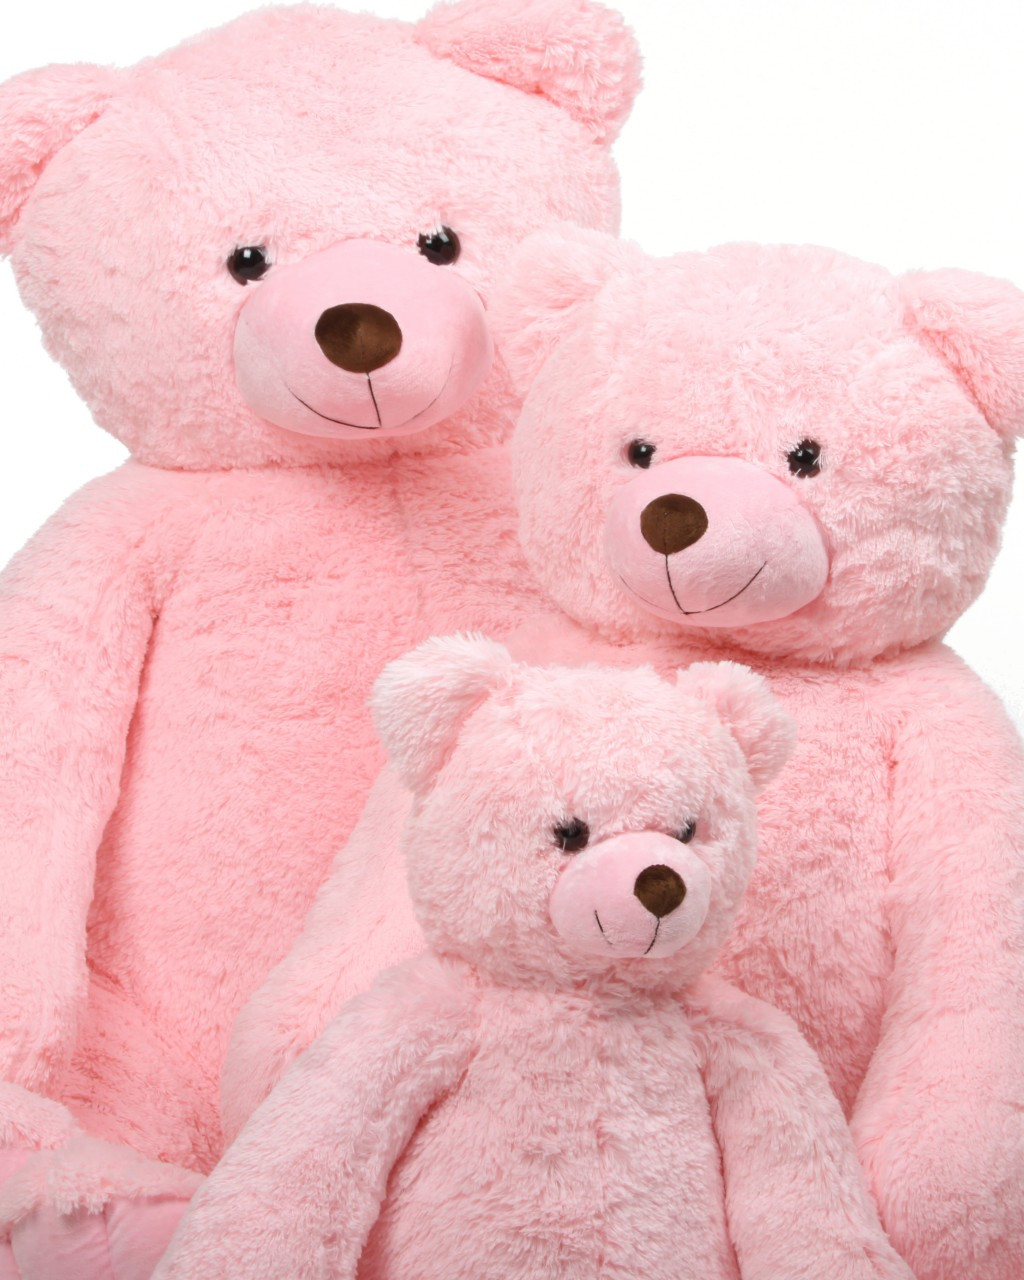 Darling Tubs 65" Pink Life Size Plush Teddy Bear - Giant 